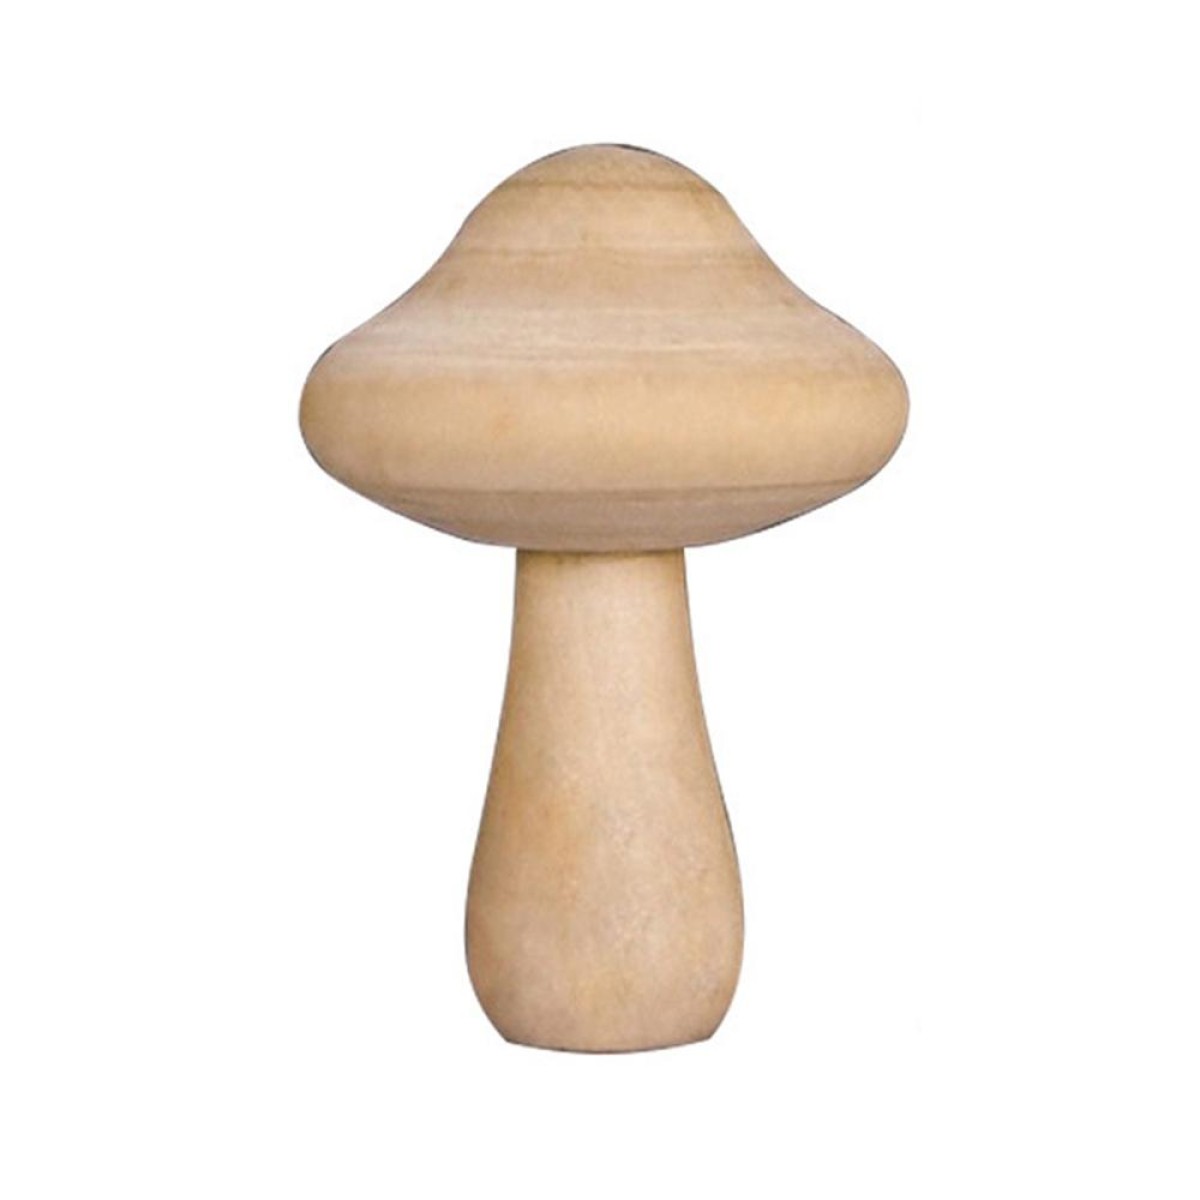 210143G Wooden Mushroom Head DIY Painted Toys Children Early Education Household Decorative Ornaments